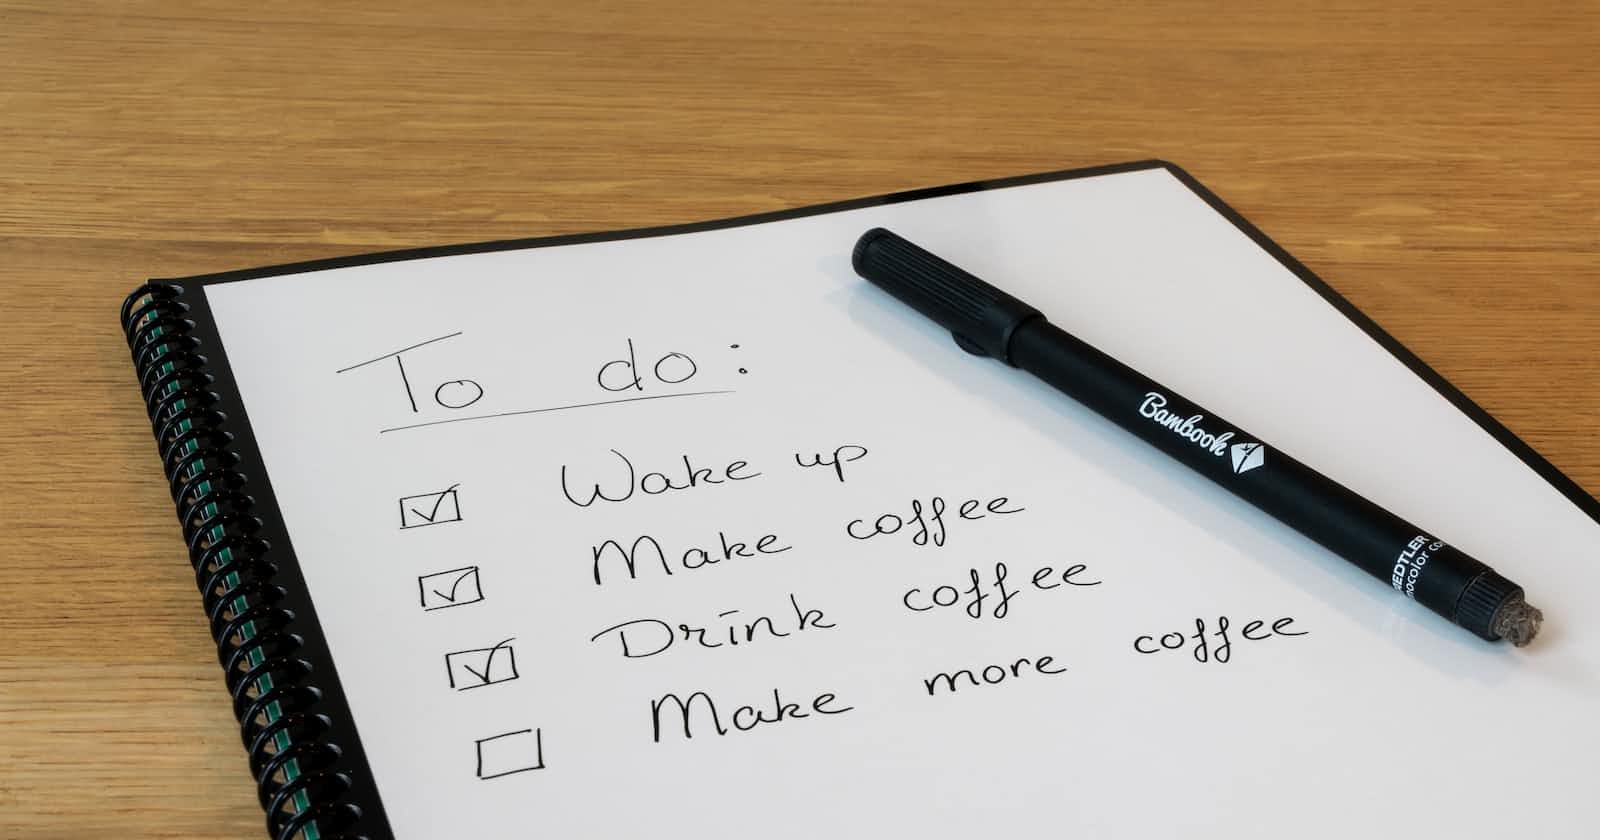 Building a To-Do List in JavaScript